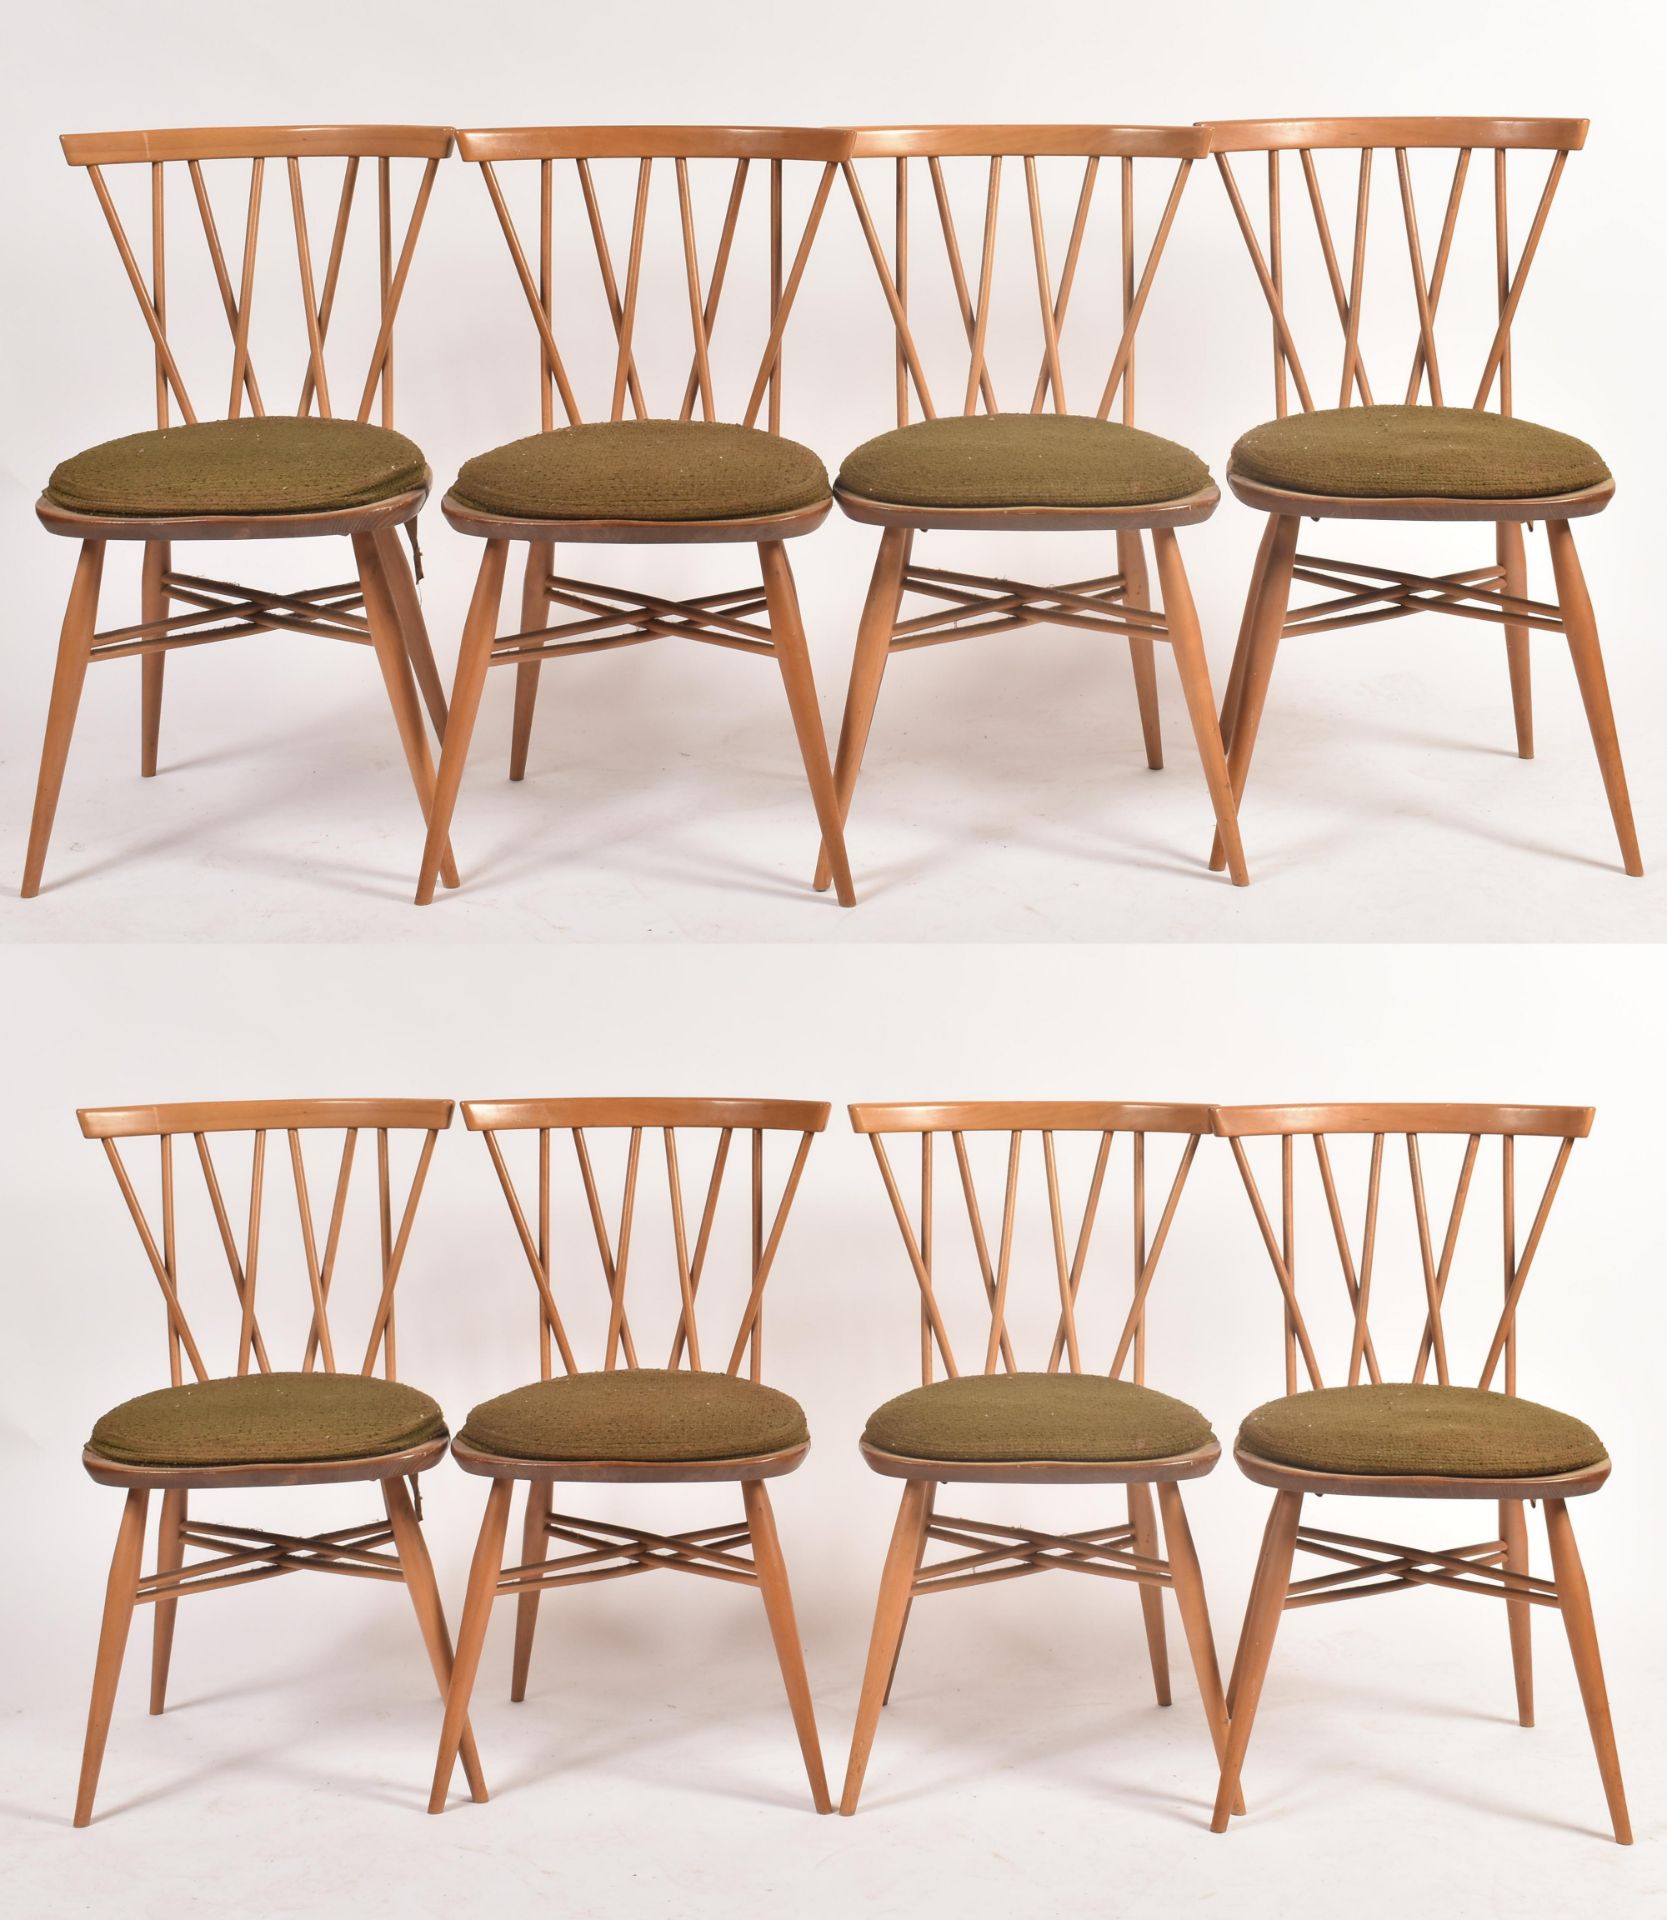 ERCOL - MODEL 376 'CANDLESTICK' - SET OF EIGHT DINING CHAIRS